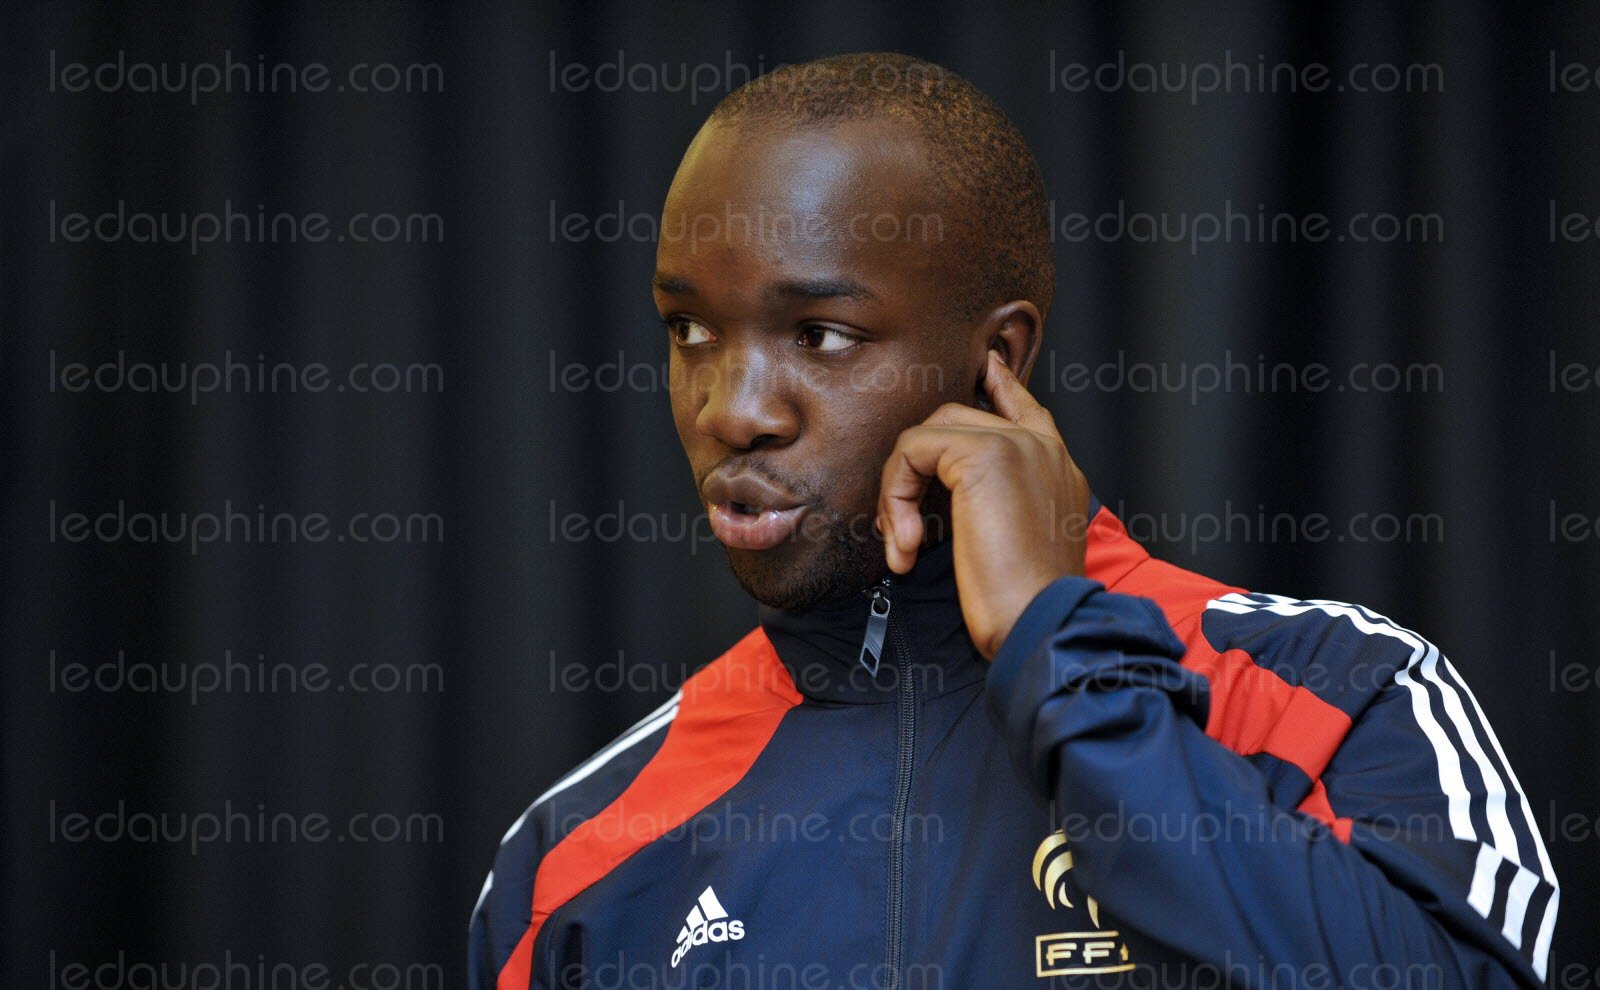 CdS: Only an “Okey” is missing from FIFA for Diarra